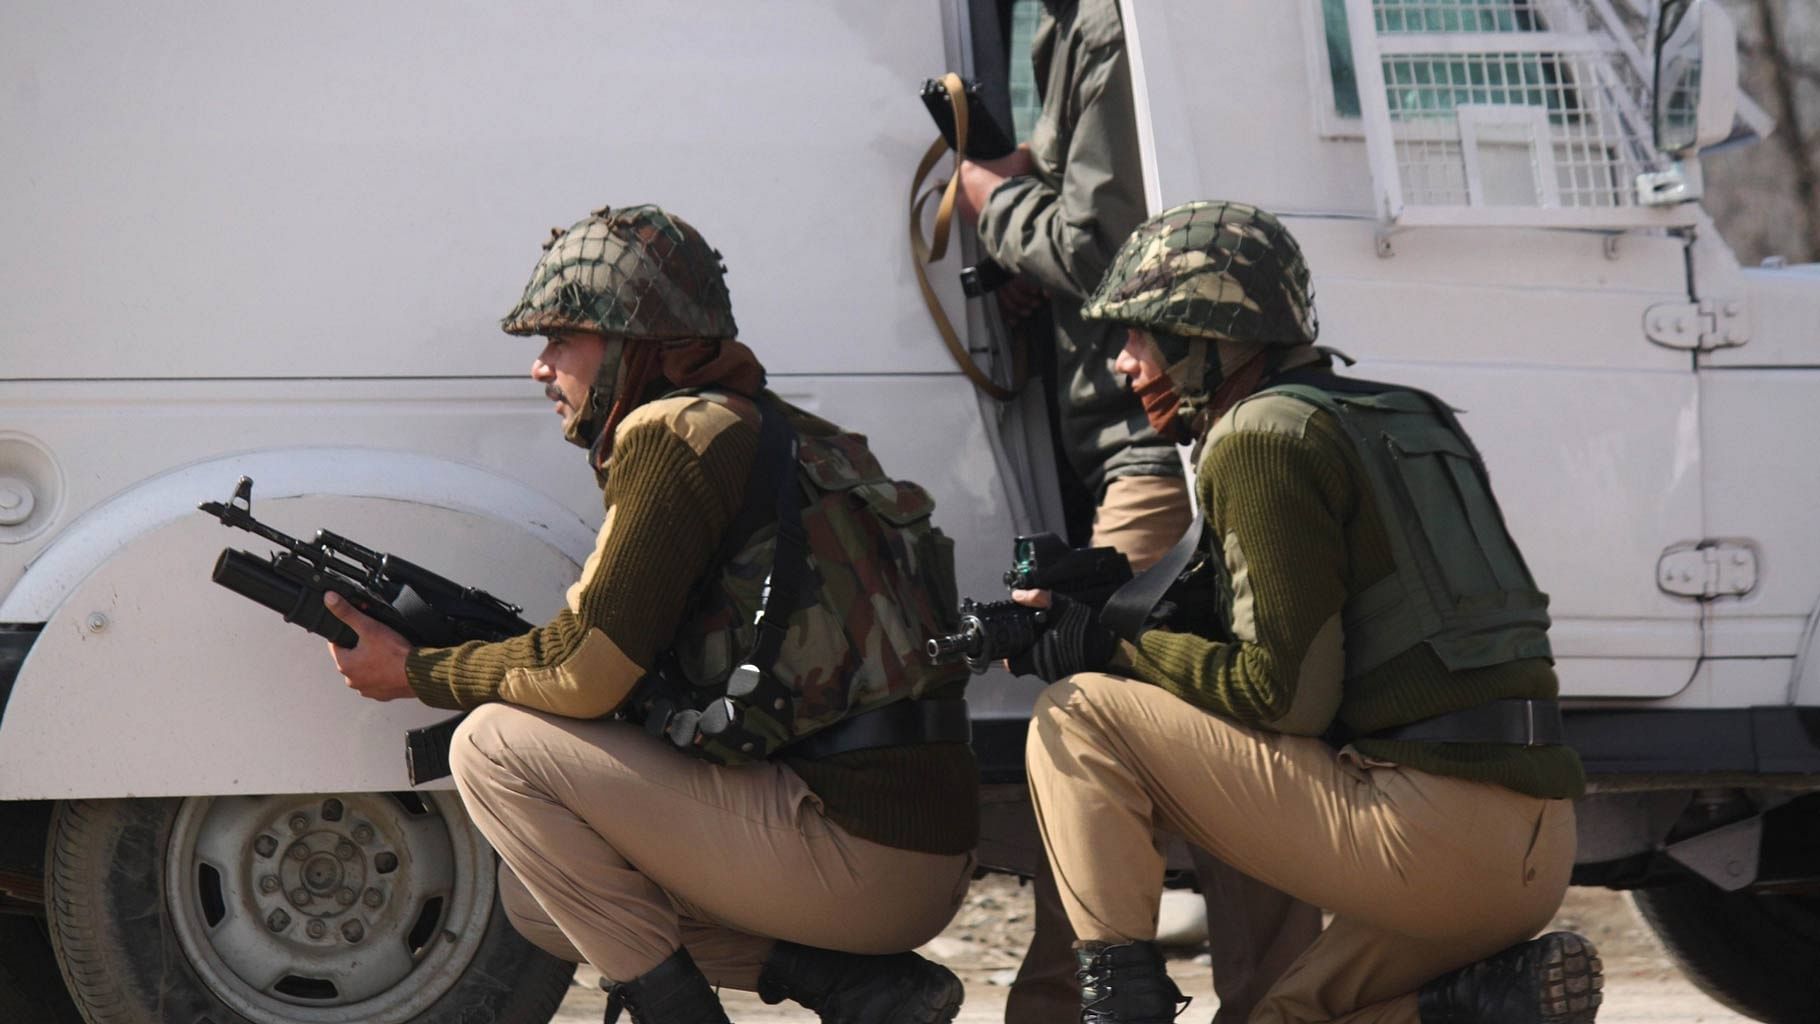 Army jawans take position during an encounter with militants in Pampore area of Jammu and Kashmir’s Pulwama district on February 21, 2016. (Photo: PTI)